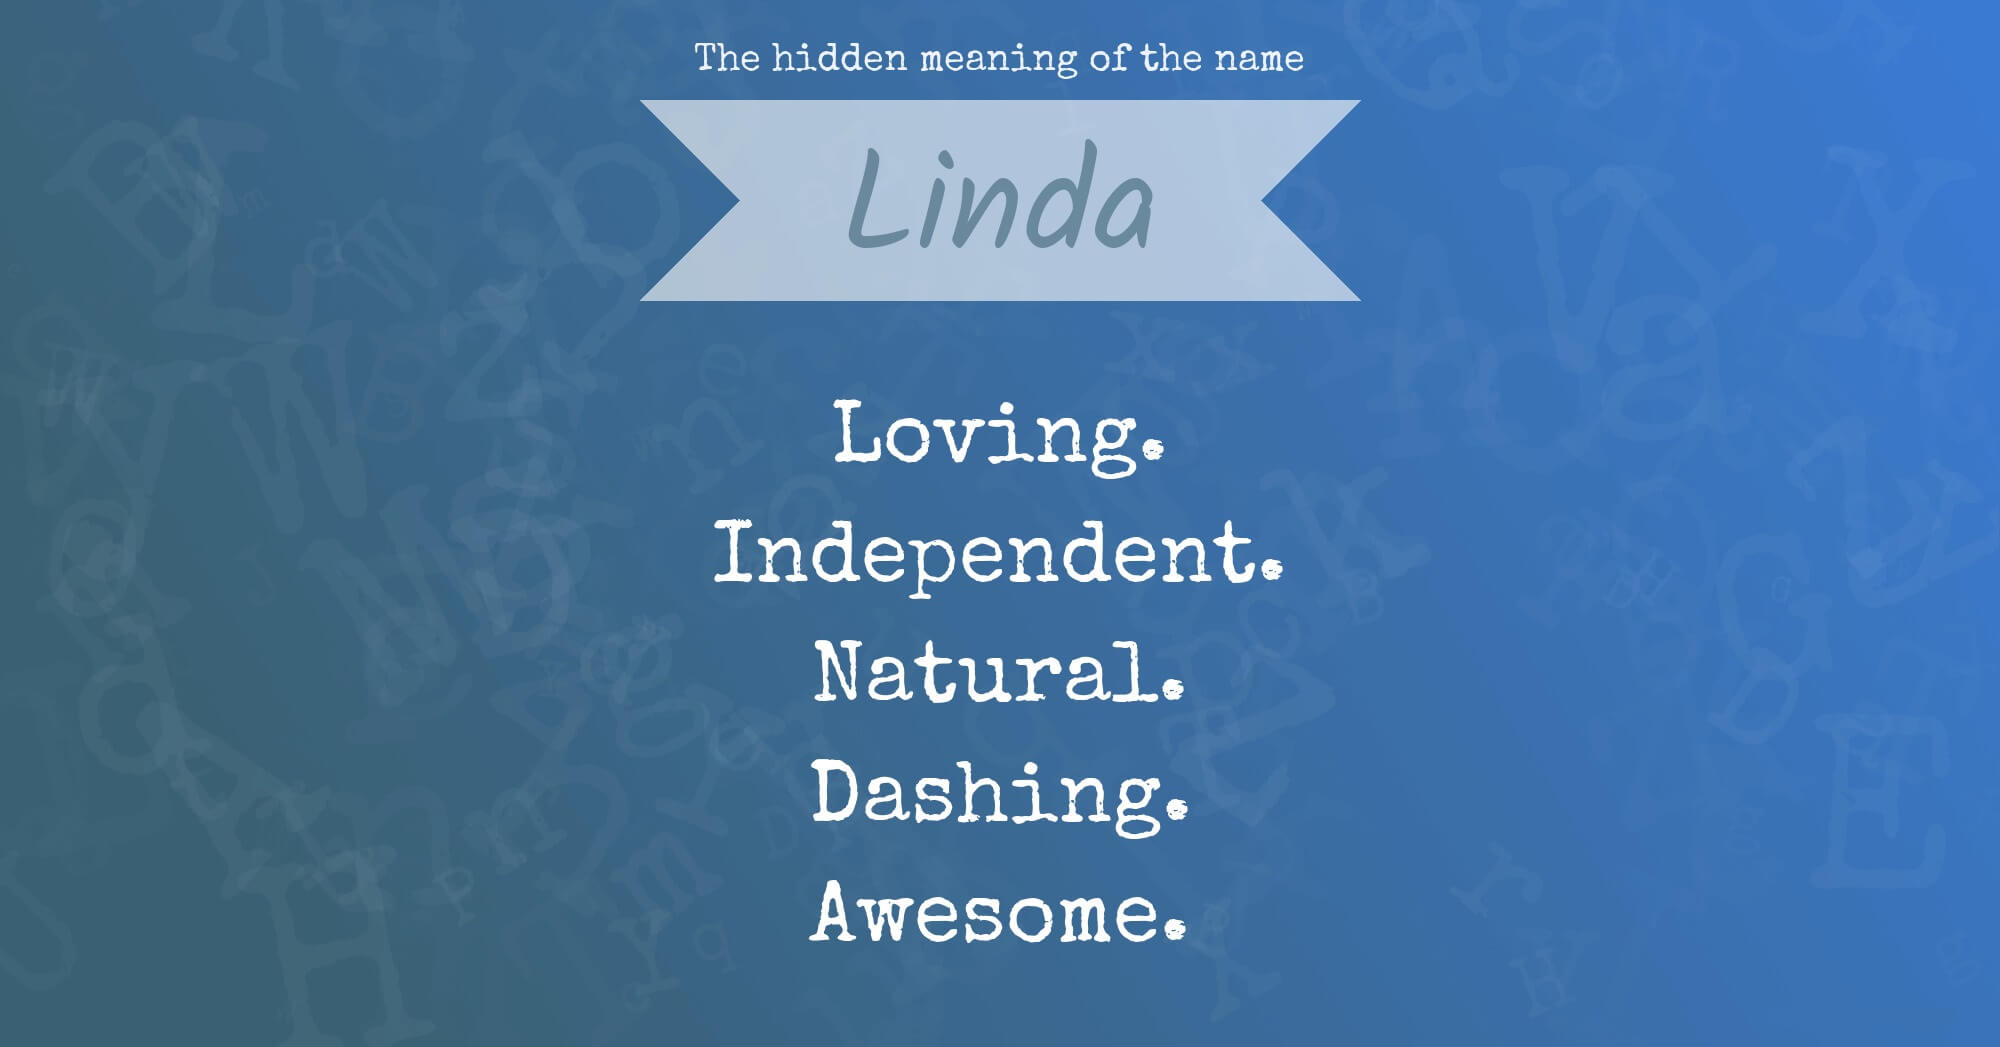 The Hidden Meaning of The Name Linda